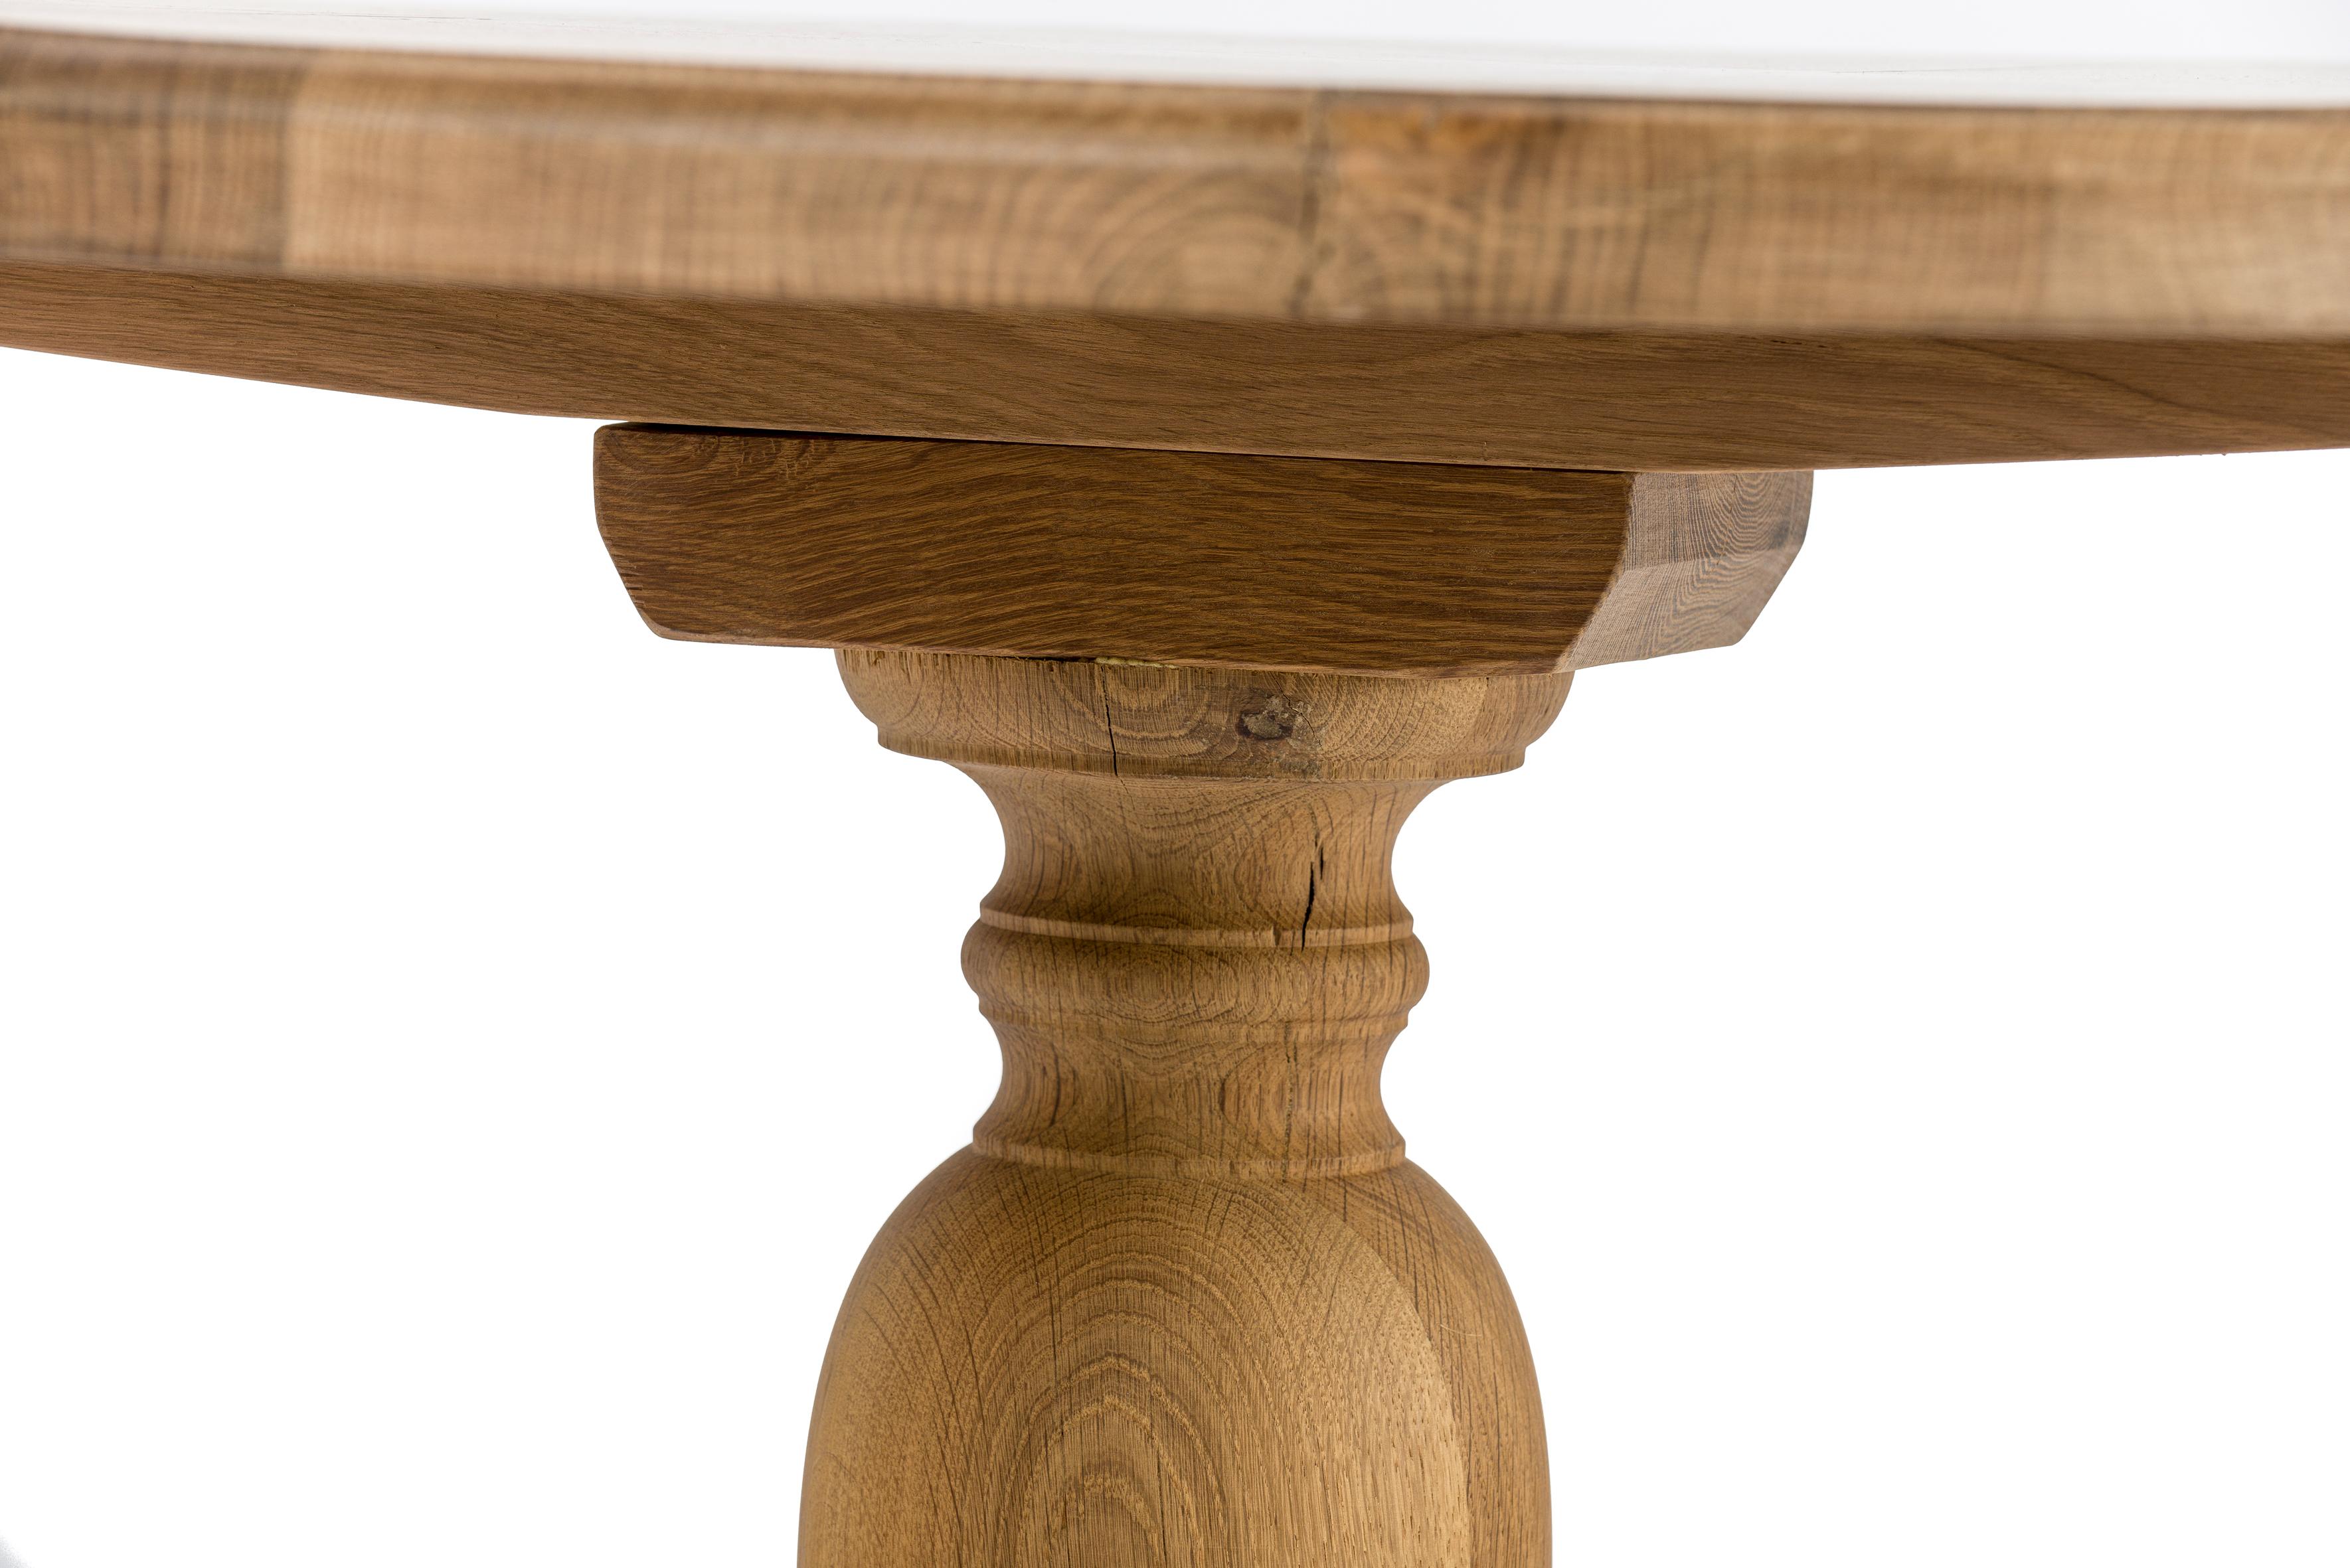 Contemporary Bespoke Rustic Solid Aged Oak Round Dining Table in Natural Matt Finish